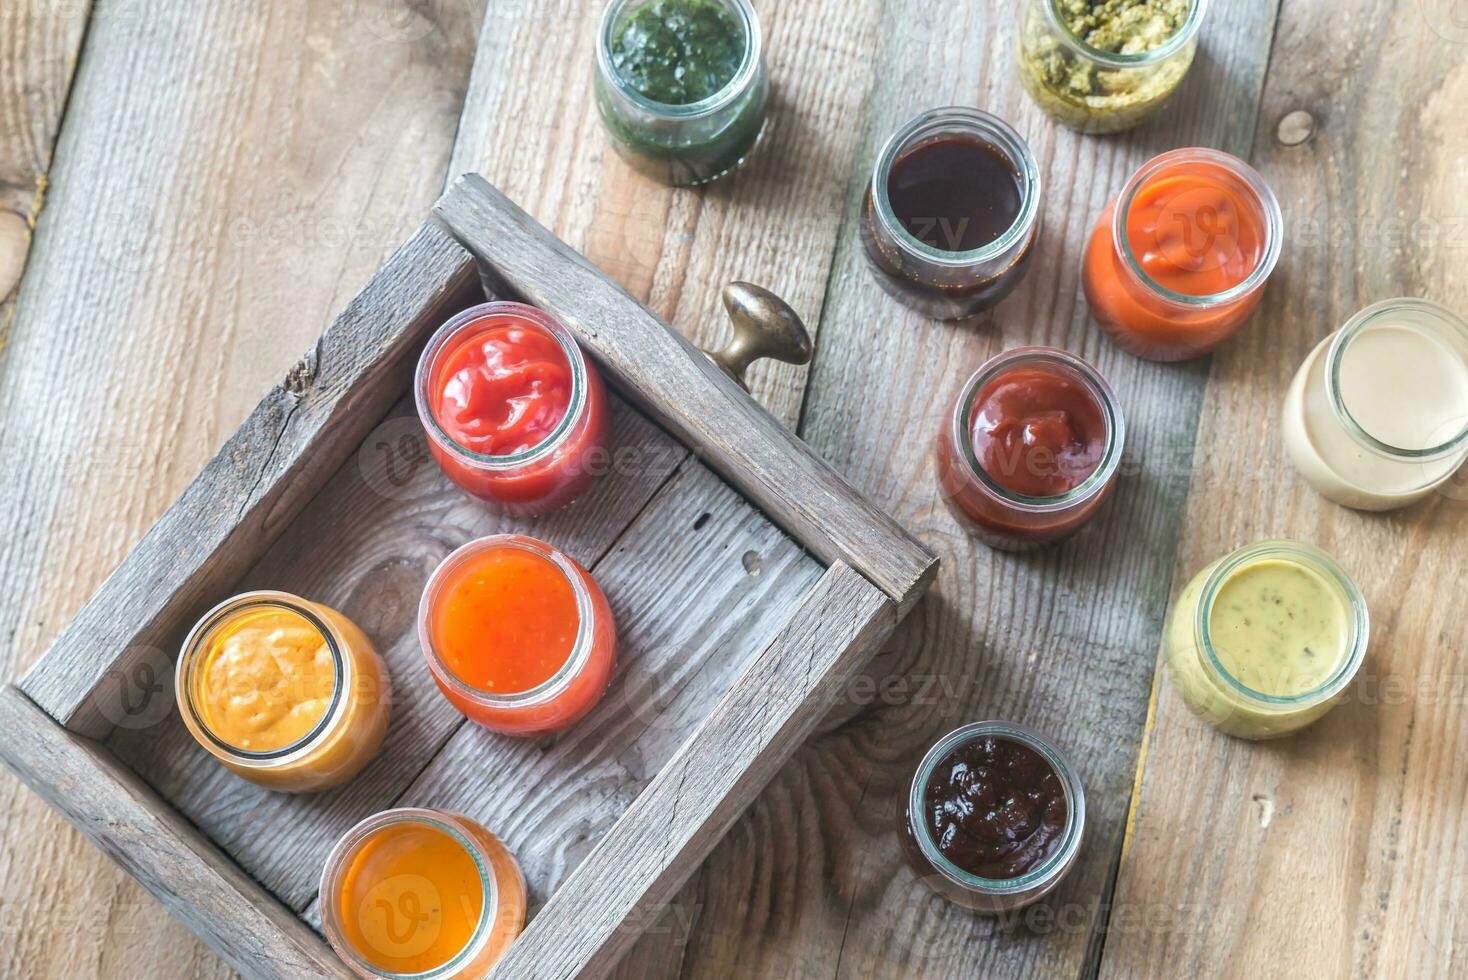 Assortment of sauces in the glass jars photo